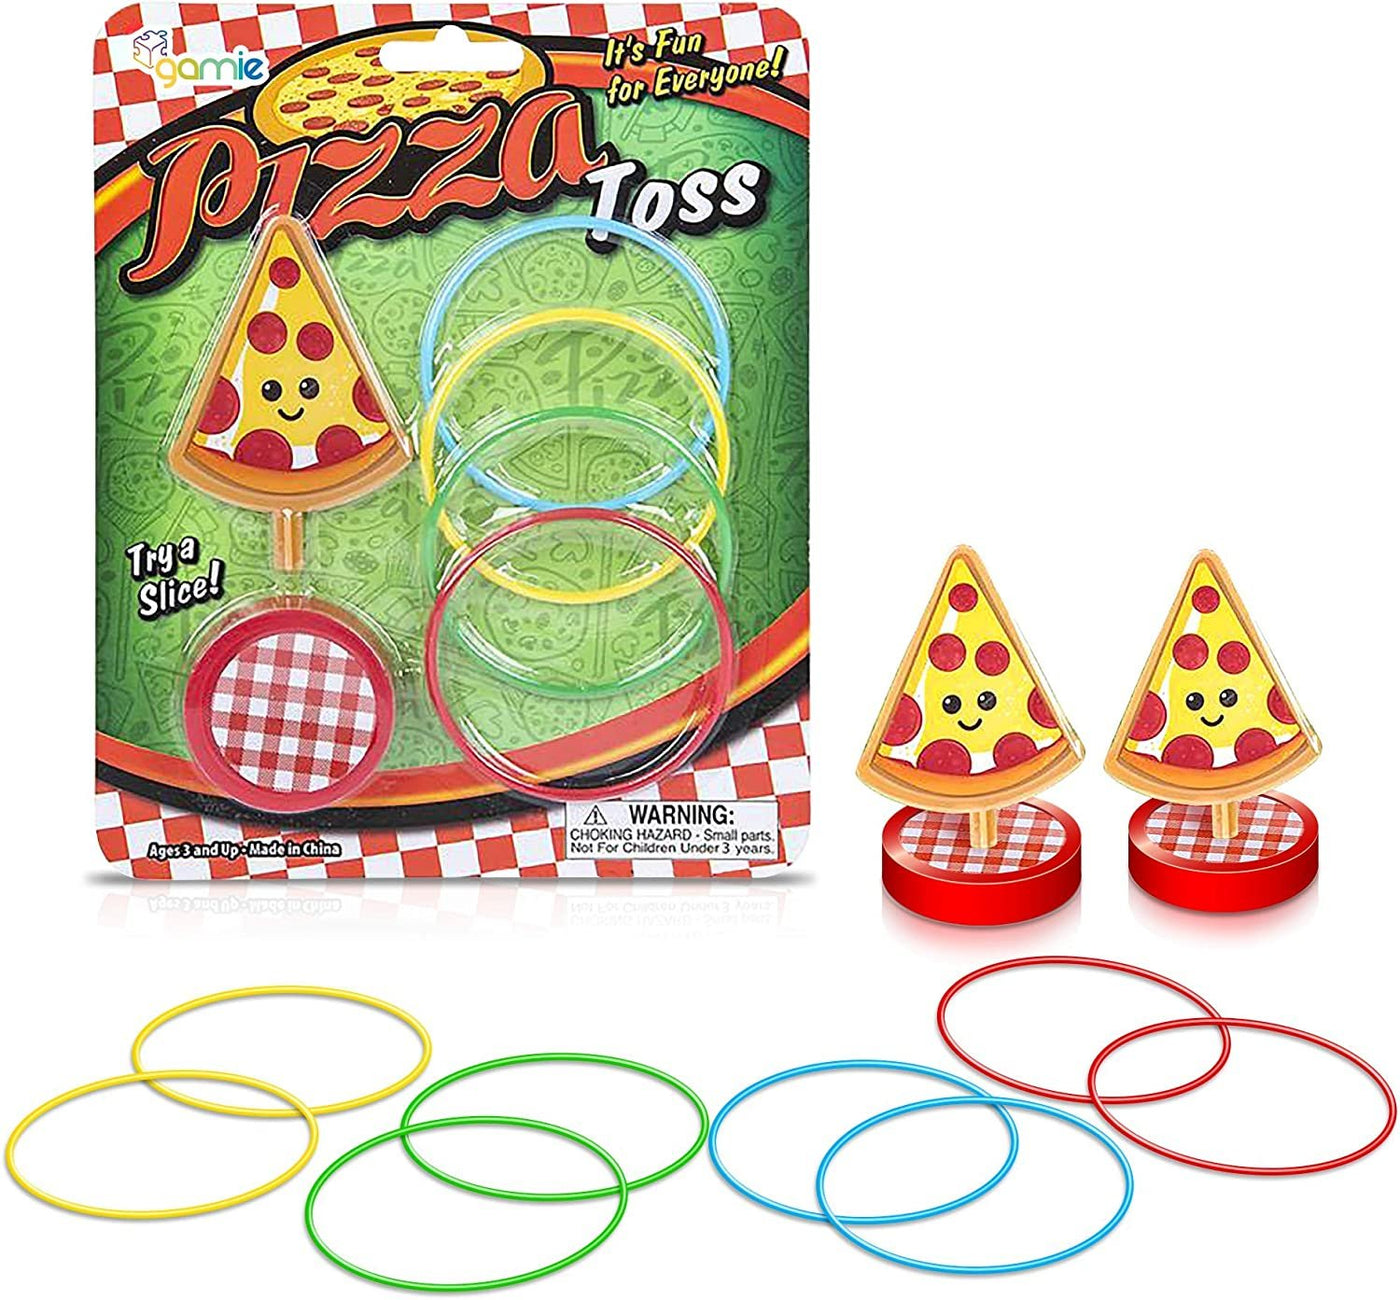 Gamie Plastic Carnival Rings (Pack of 24) | 24-2.5” Rings for Ring Toss | Fun Target Toys | Cool Homemade School and Carnival Party Favors